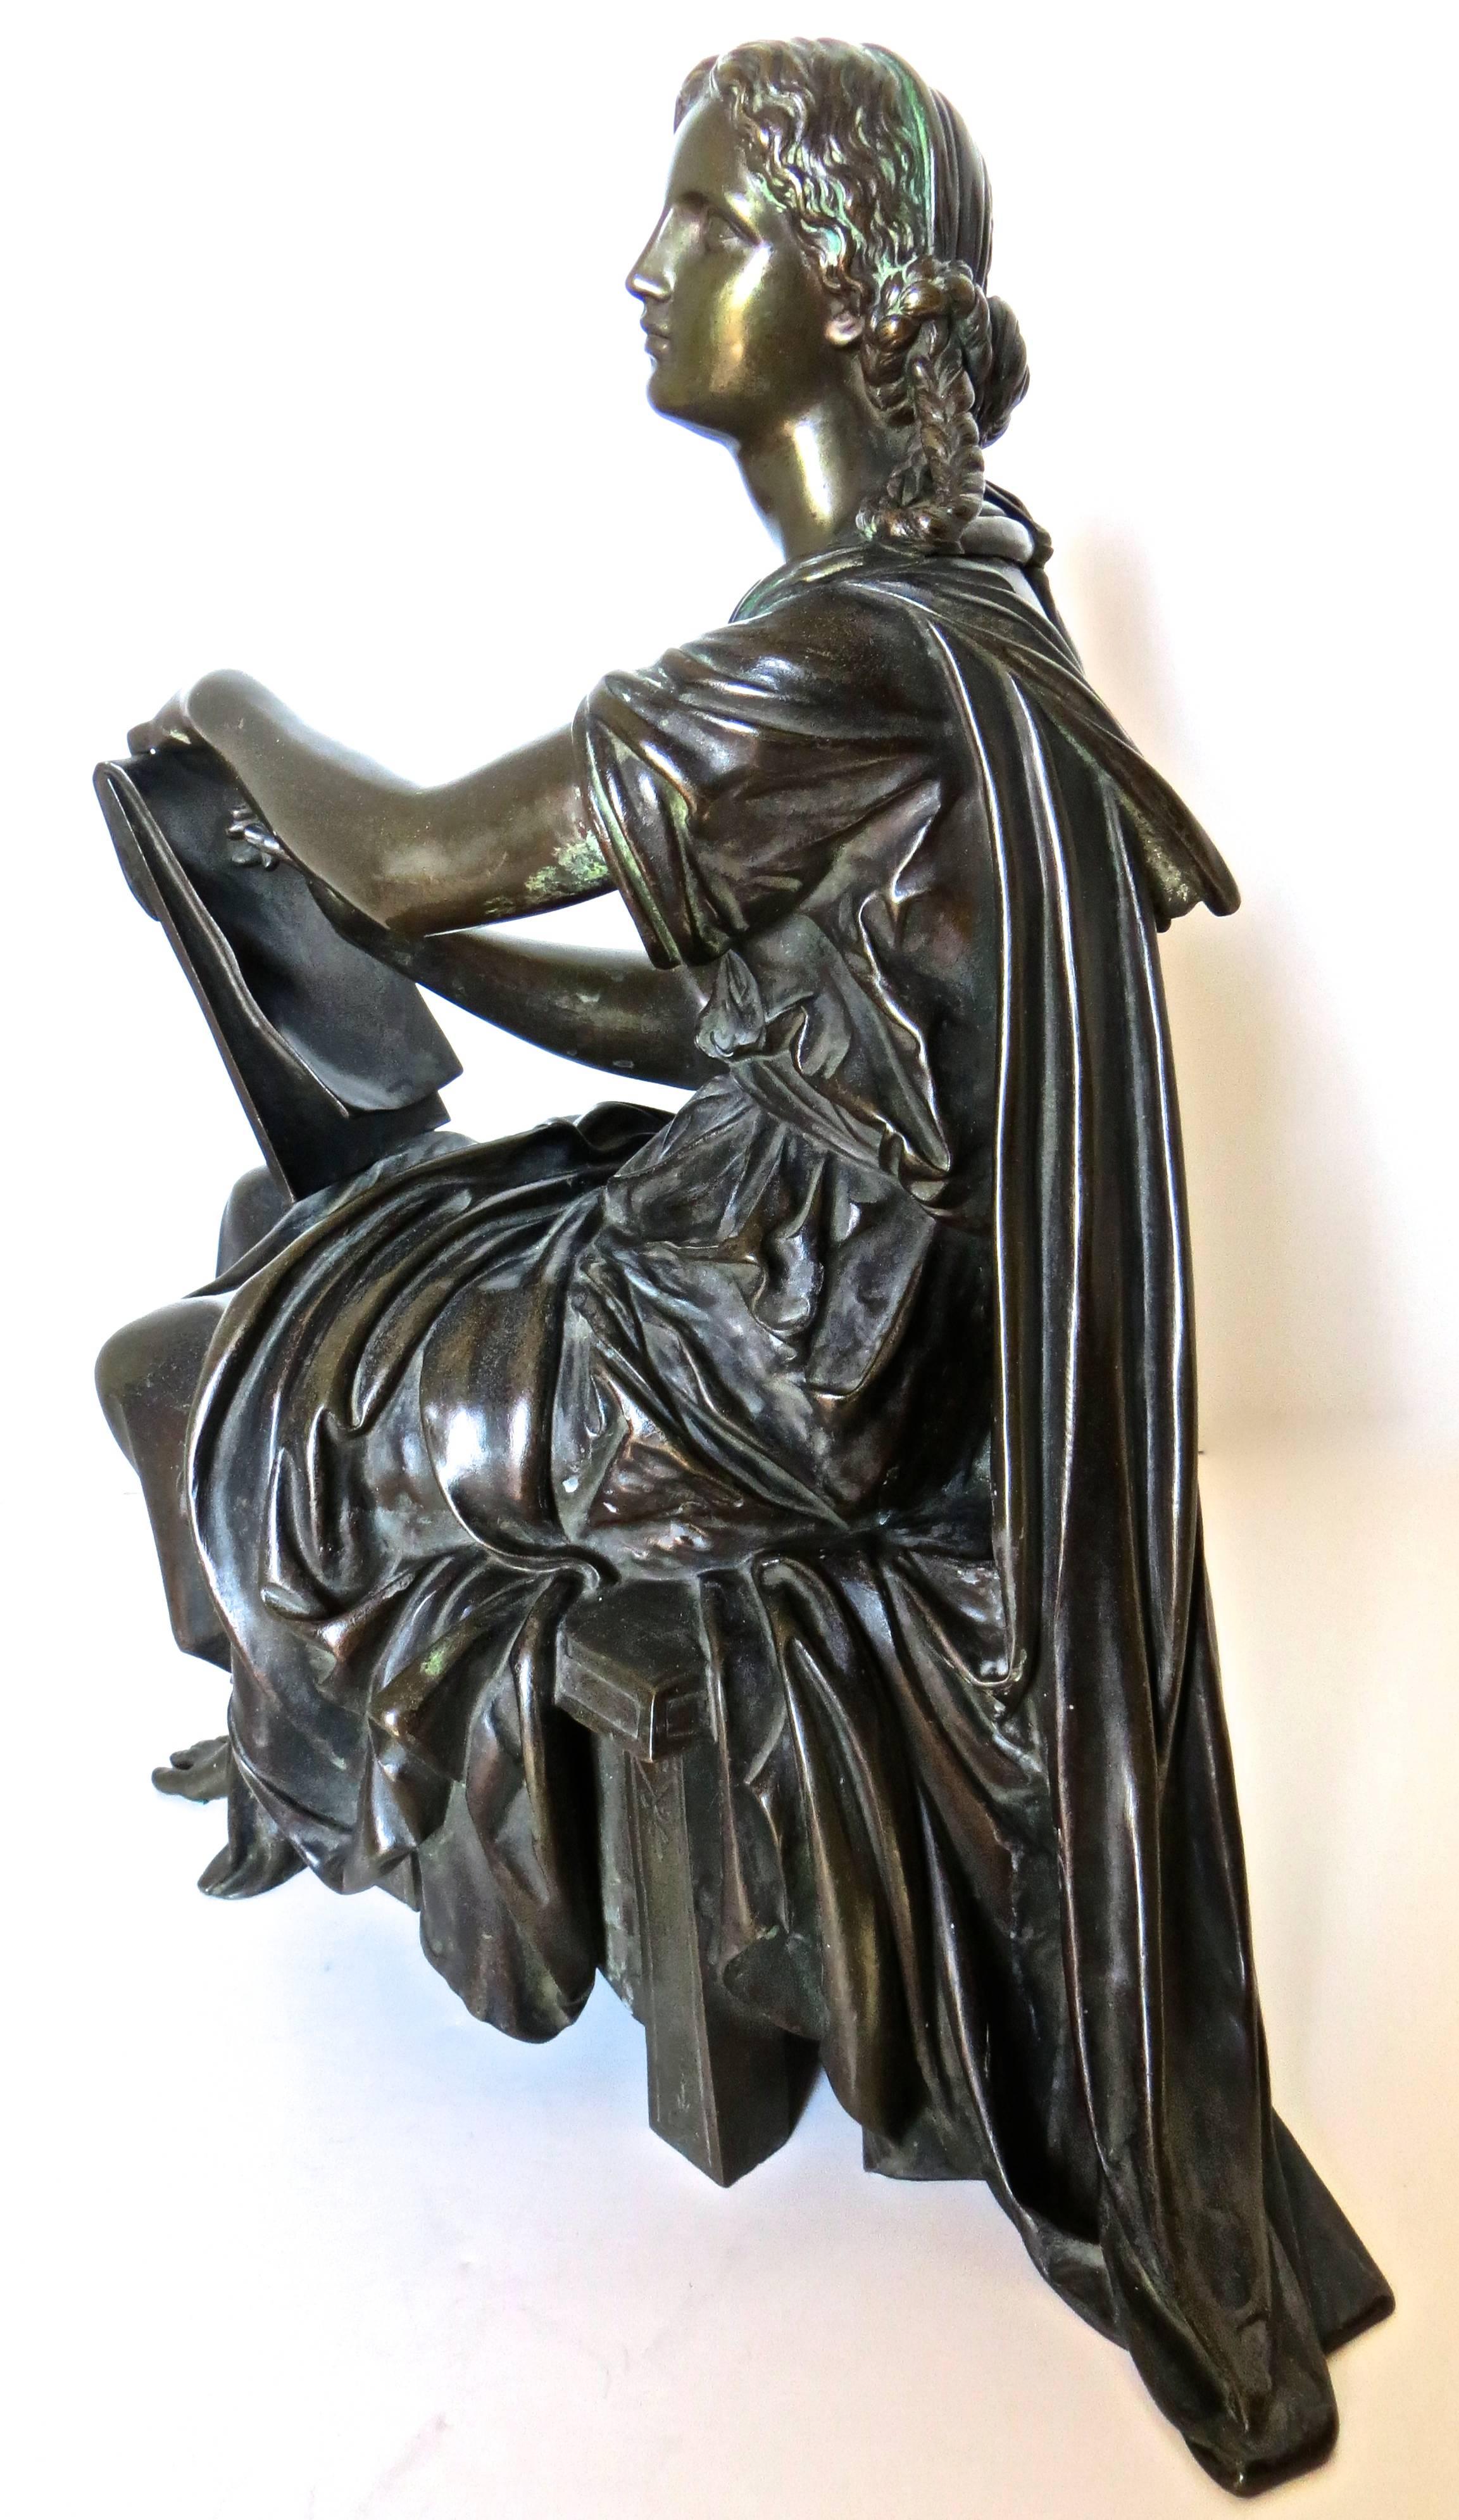 Of French origin, this mid to late 19th century bronze figure was made by the prolific French bronze making artist family 